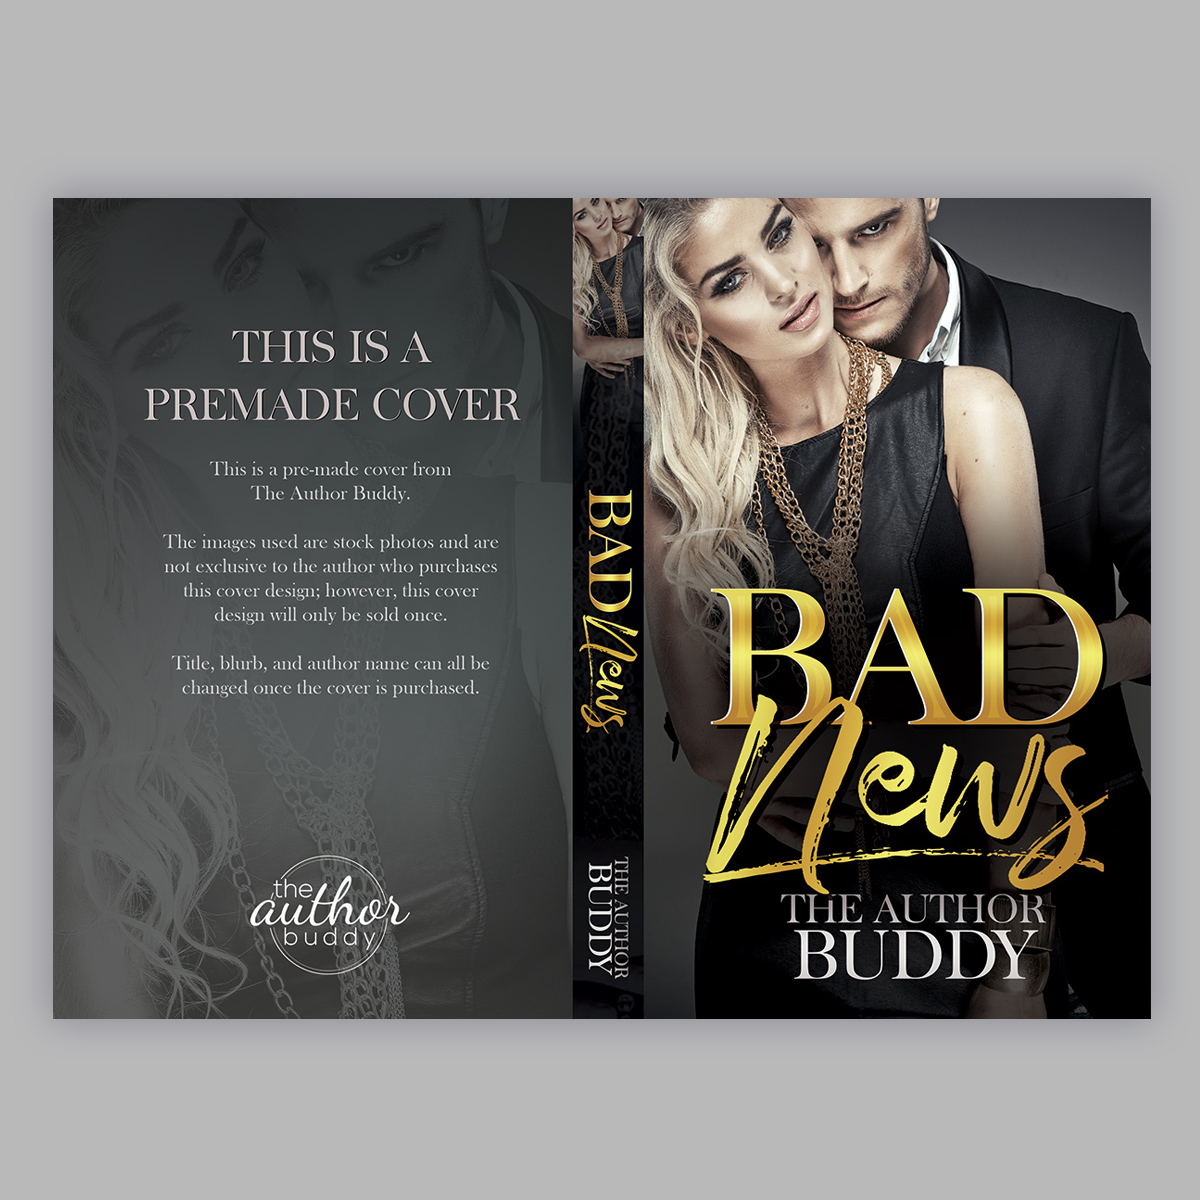 Bad News - Premade Book Cover from The Author Buddy